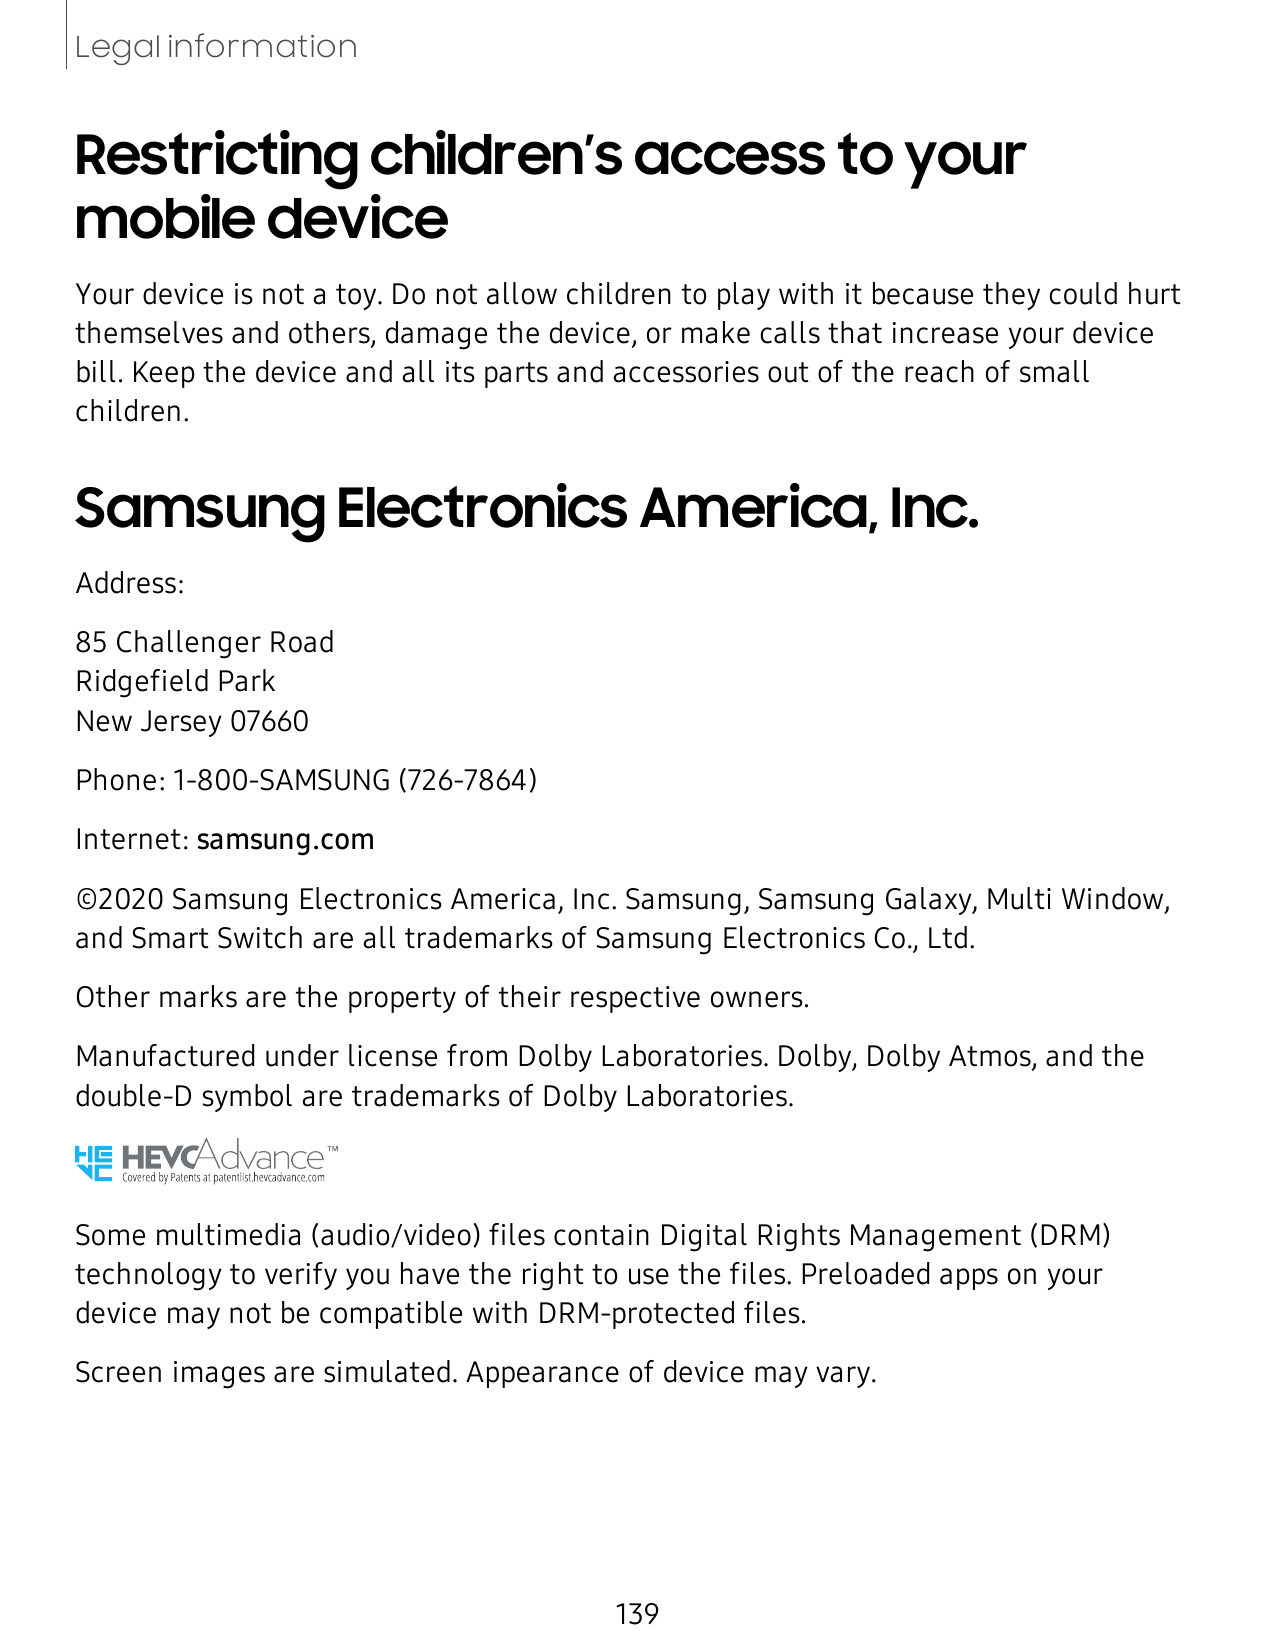 Legal informationRestricting children’s access to yourmobile deviceYour device is not a toy. Do not allow children to play with 